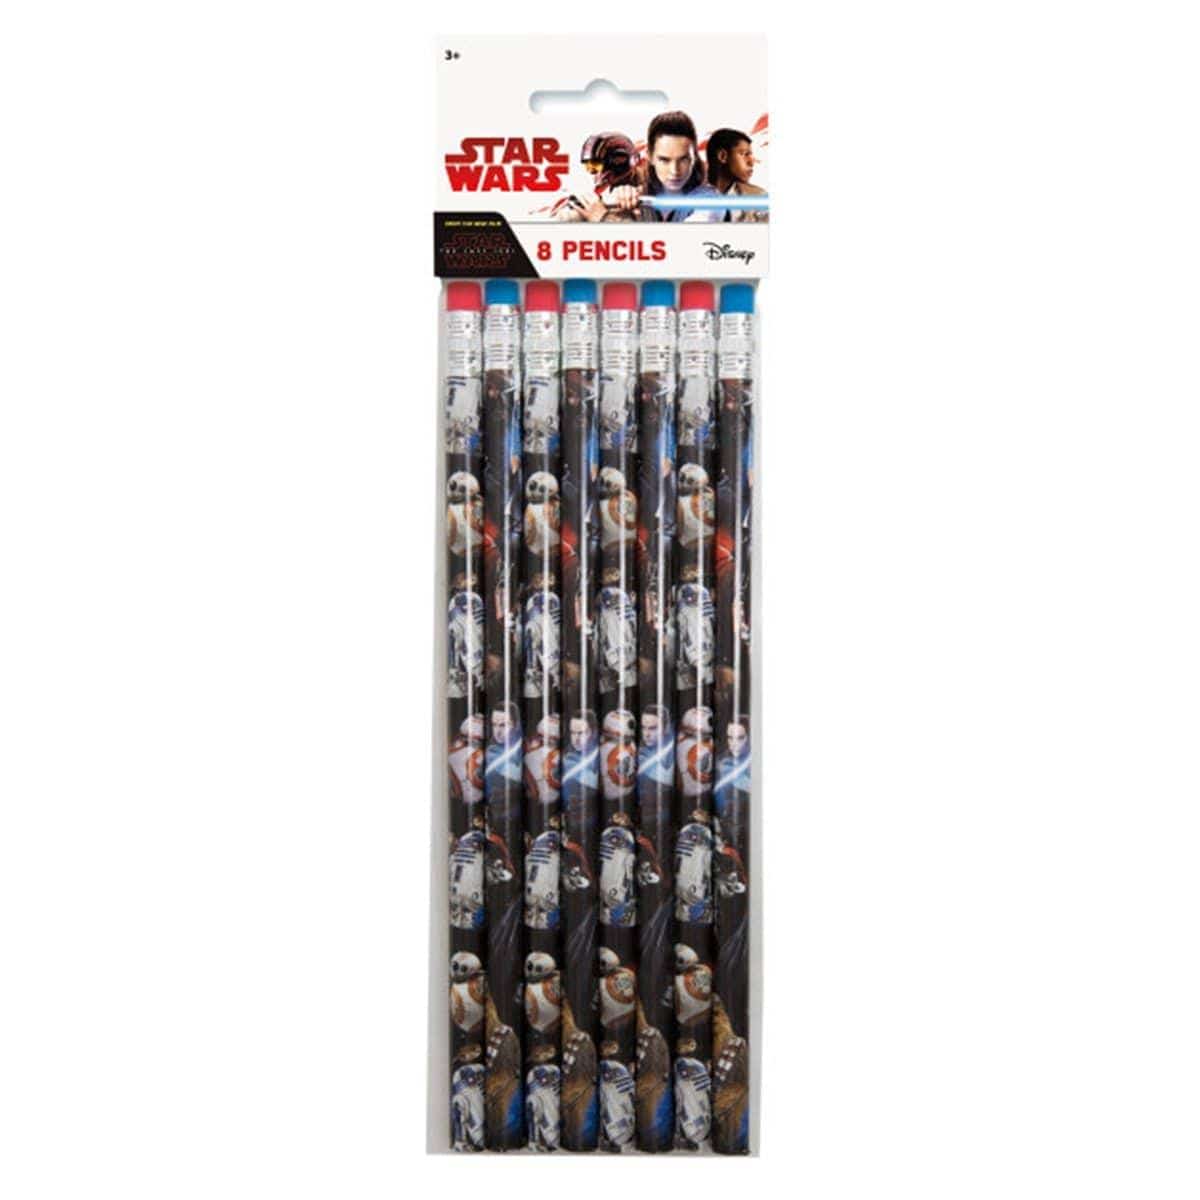 Buy Kids Birthday Star Wars pencils, 8 per package sold at Party Expert